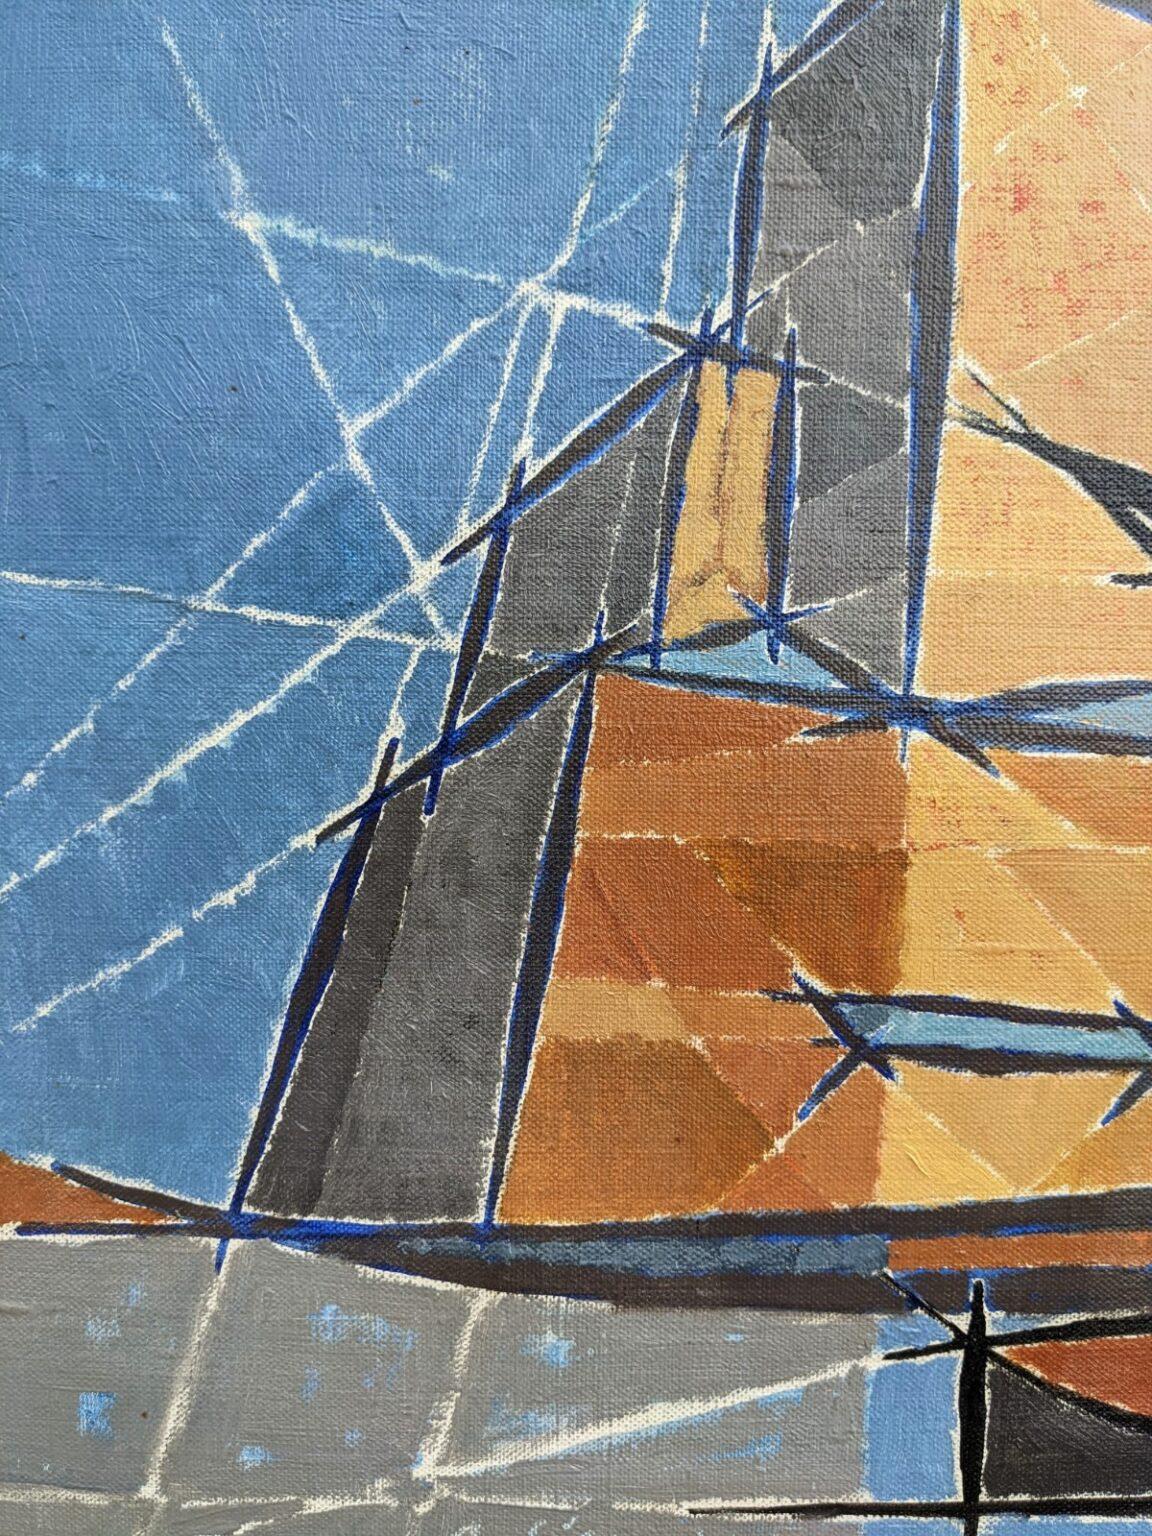 PONTOON
Size: 39 x 58 cm (including frame)
Oil on Canvas

A semi-abstract mid century geometric painting in oil, dated 1954.

Here the artist has captured an industrial marine structure, the pontoon crane. The artist has flattened the composition